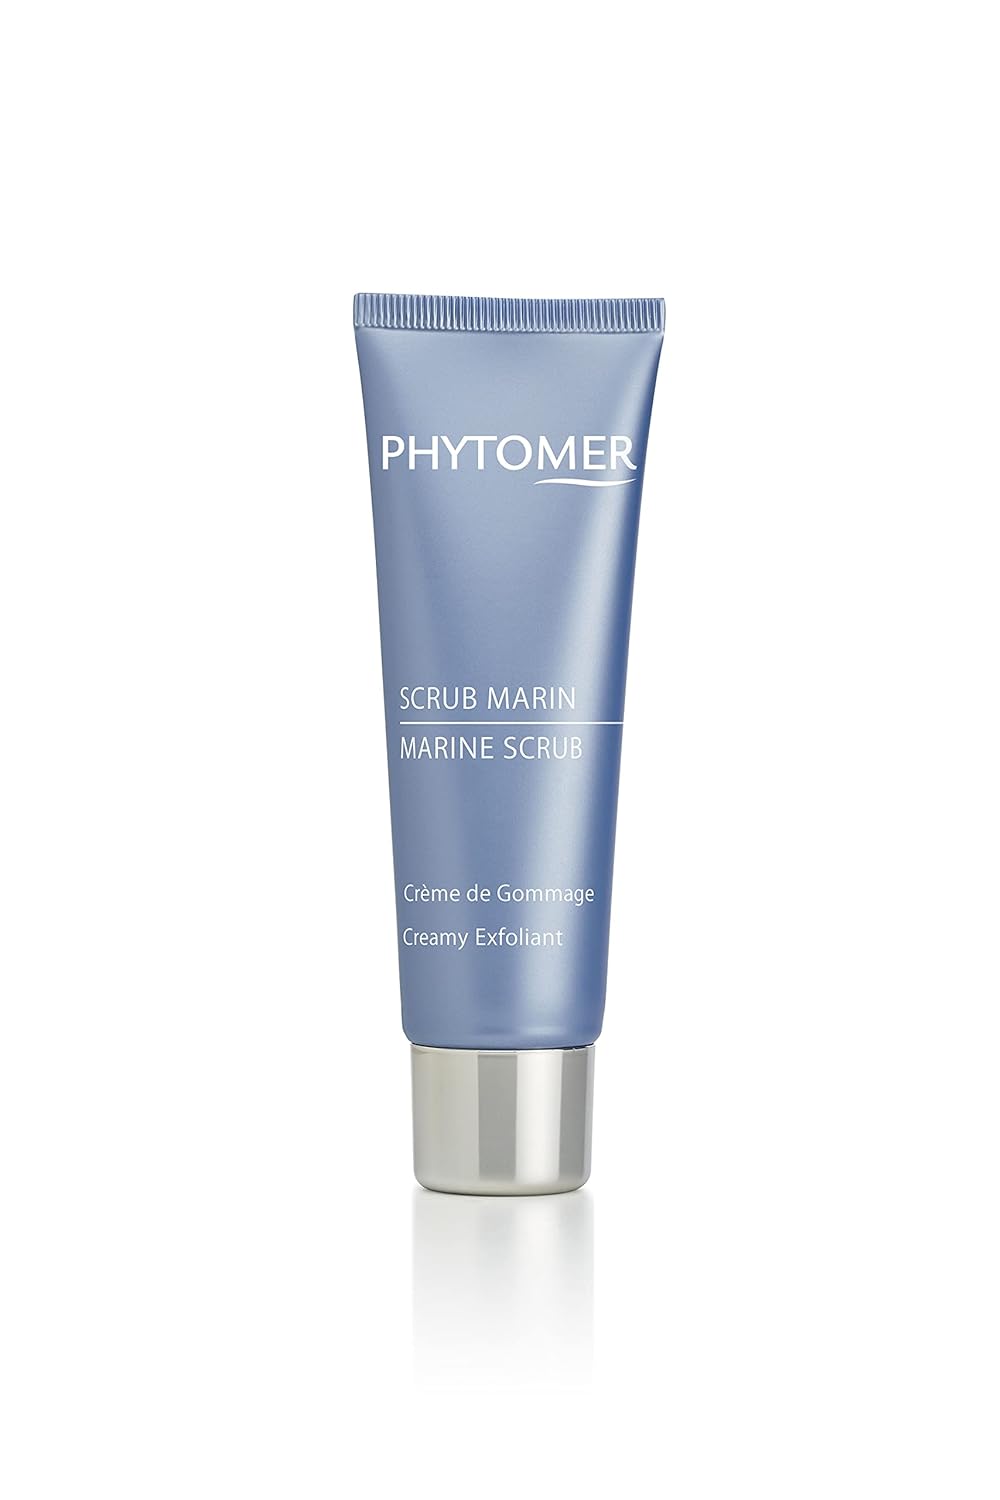 PHYTOMER Marine Scrub Creamy Exfoliant Face Wash | Hydrating Facial Scrub to Refine Skin Texture | Gentle Exfoliator & Cleanser for Face & Neck | Reveal Clearer, Softer Skin | 50